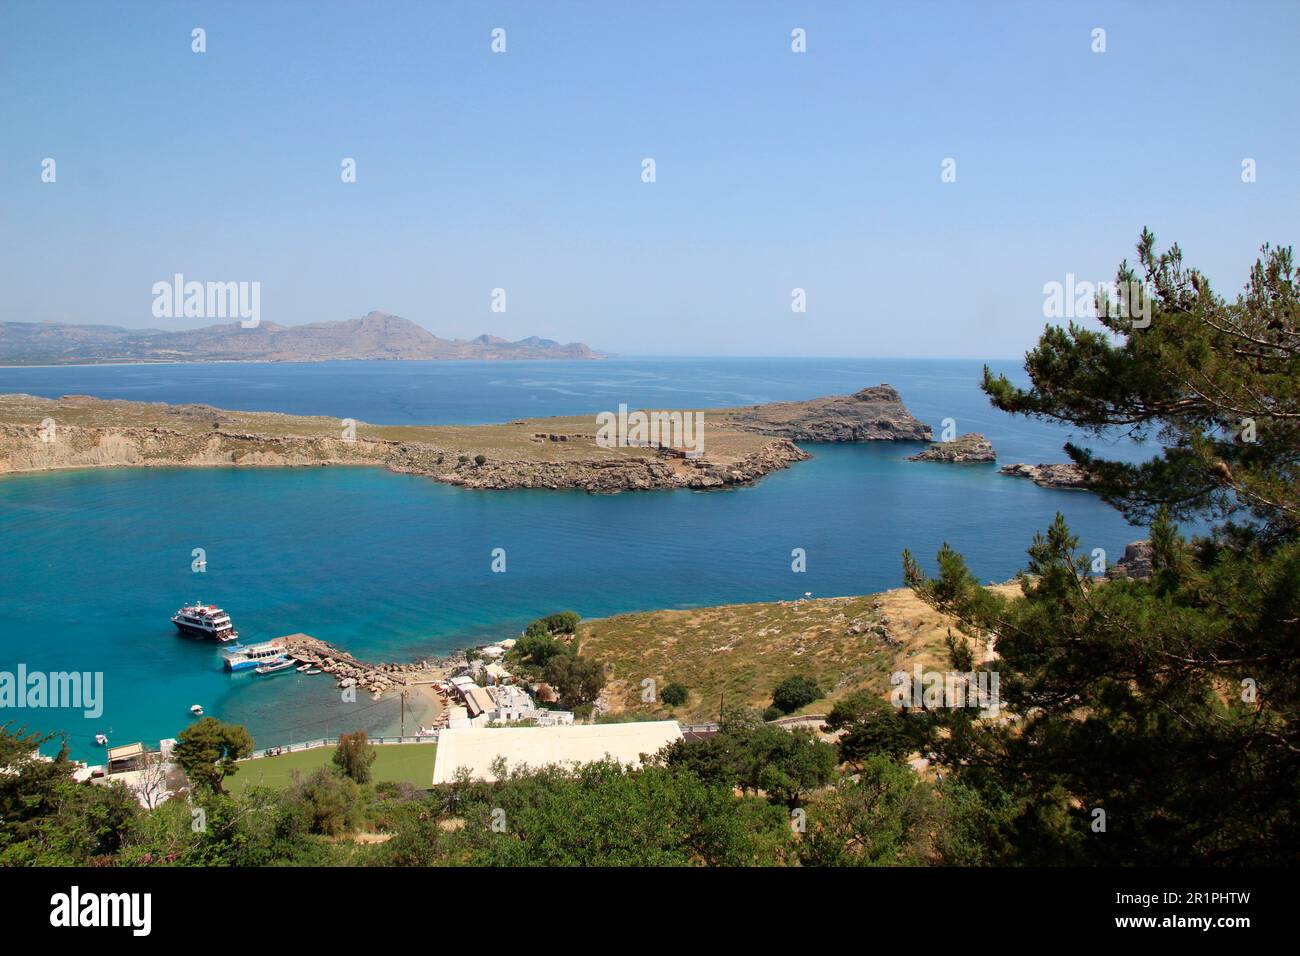 View from the Acropolis to the harbor, Lindos Bay, sea, seashore, Lindos, Rhodes, Dodecanese, Greece, grasses, atmospheric, blue sky Stock Photo